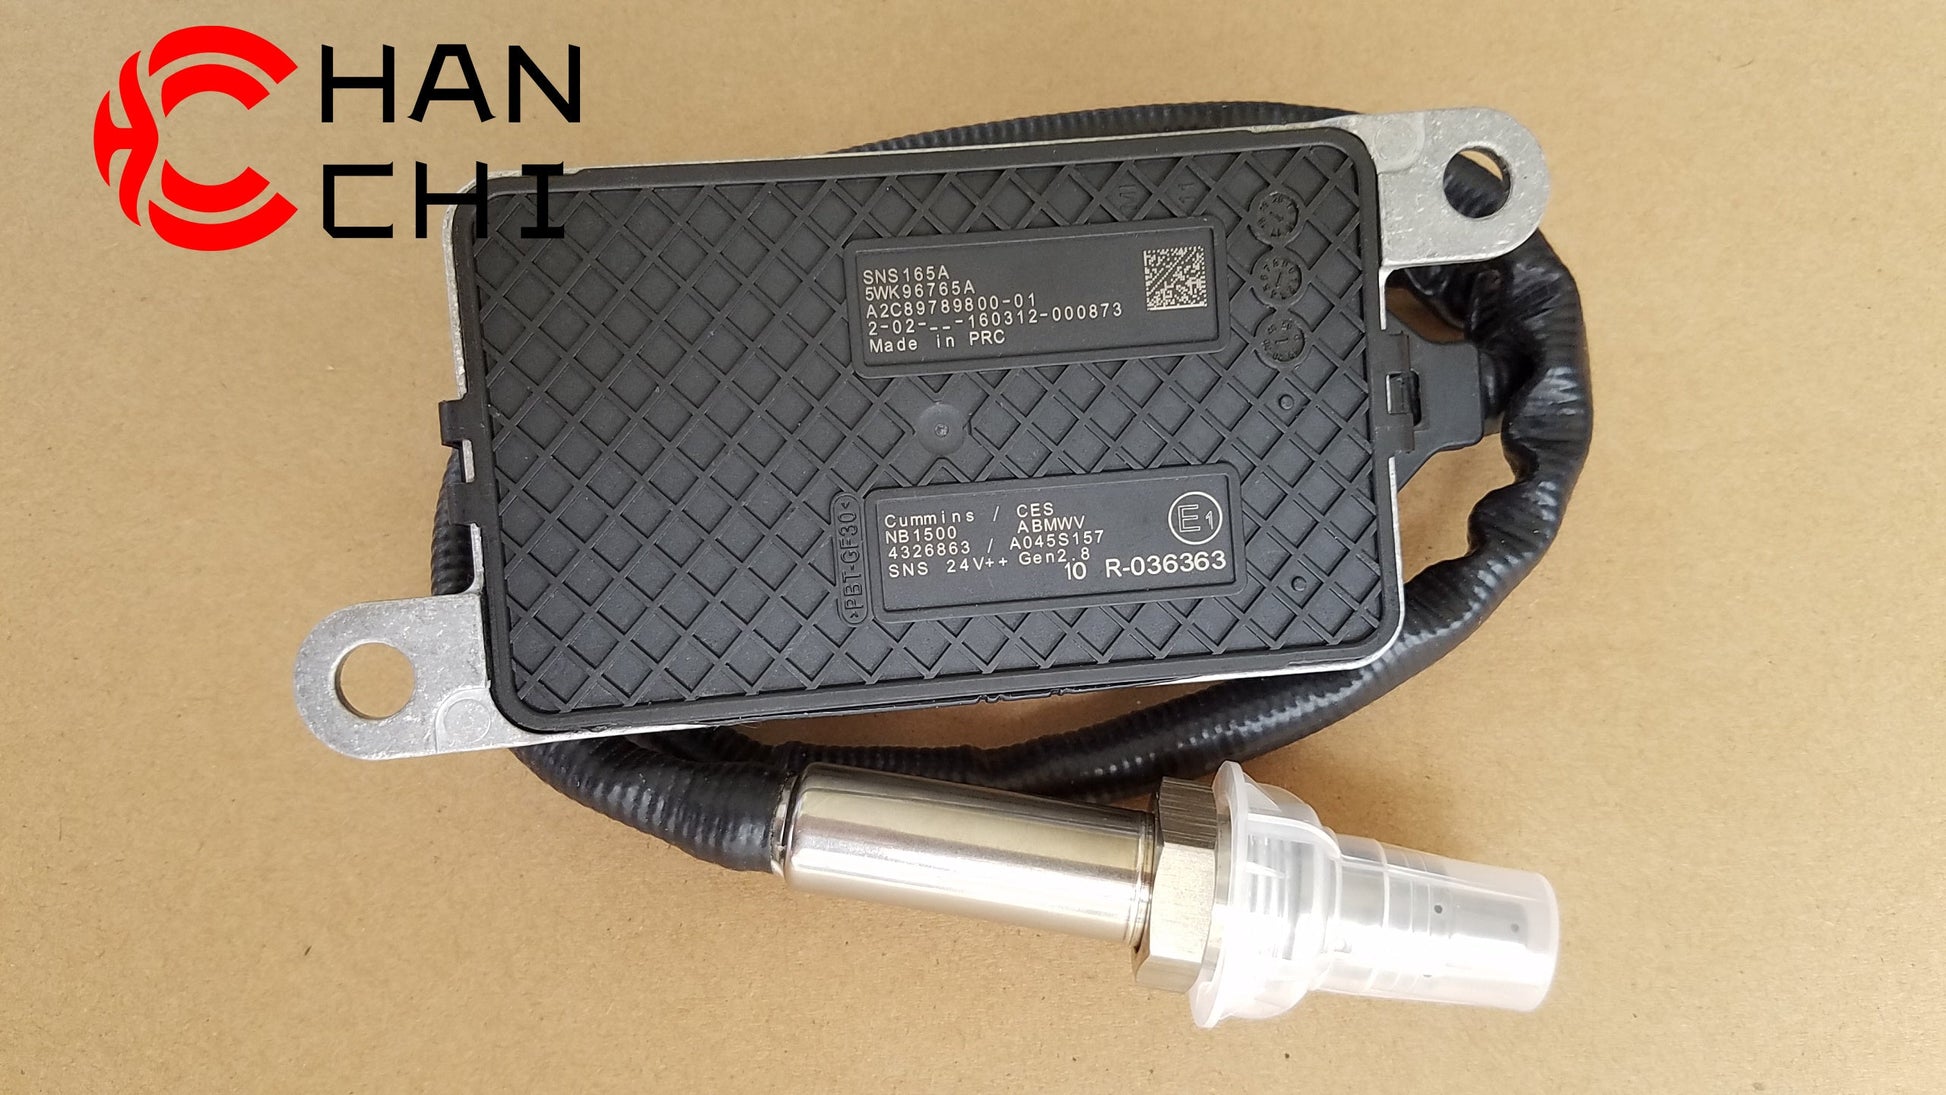 OEM: 5WK96765A 4326863Material: ABS metalColor: black silverOrigin: Made in ChinaWeight: 400gPacking List: 1* Nitrogen oxide sensor NOx More ServiceWe can provide OEM Manufacturing serviceWe can Be your one-step solution for Auto PartsWe can provide technical scheme for you Feel Free to Contact Us, We will get back to you as soon as possible.